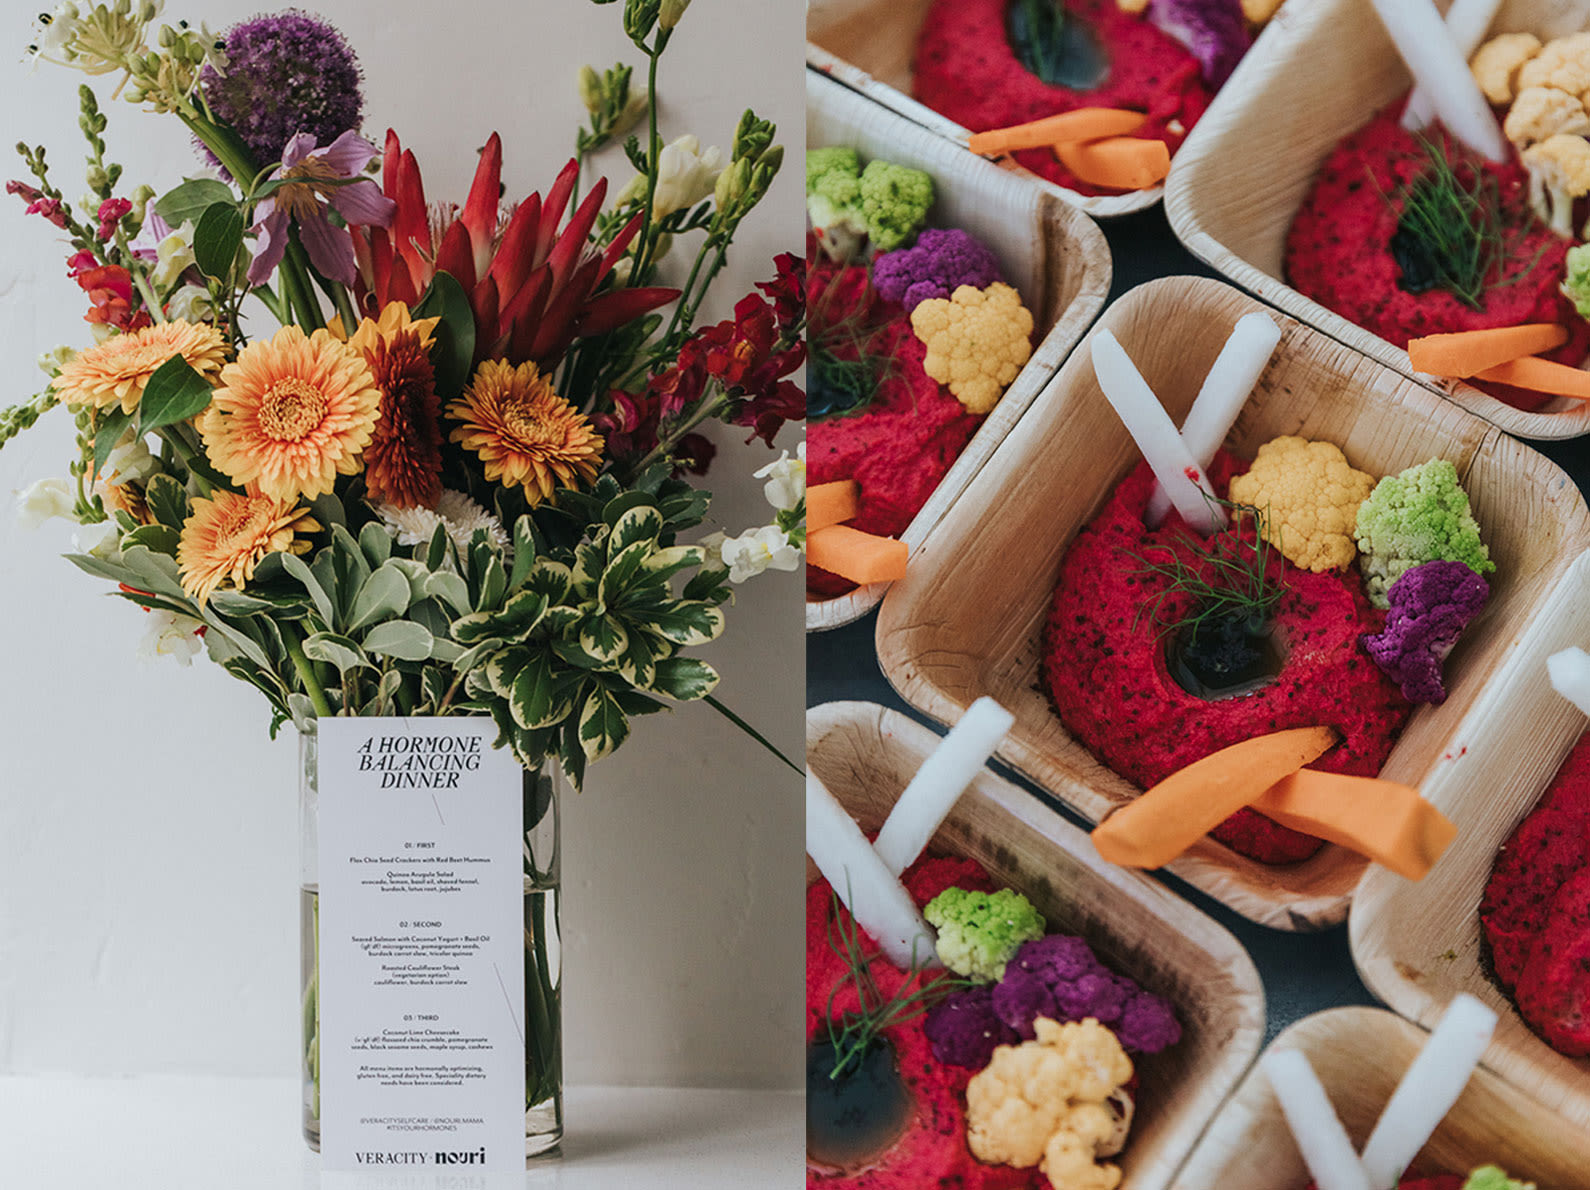 A dinner menu in front of colorful flowers and hormone balancing dishes.